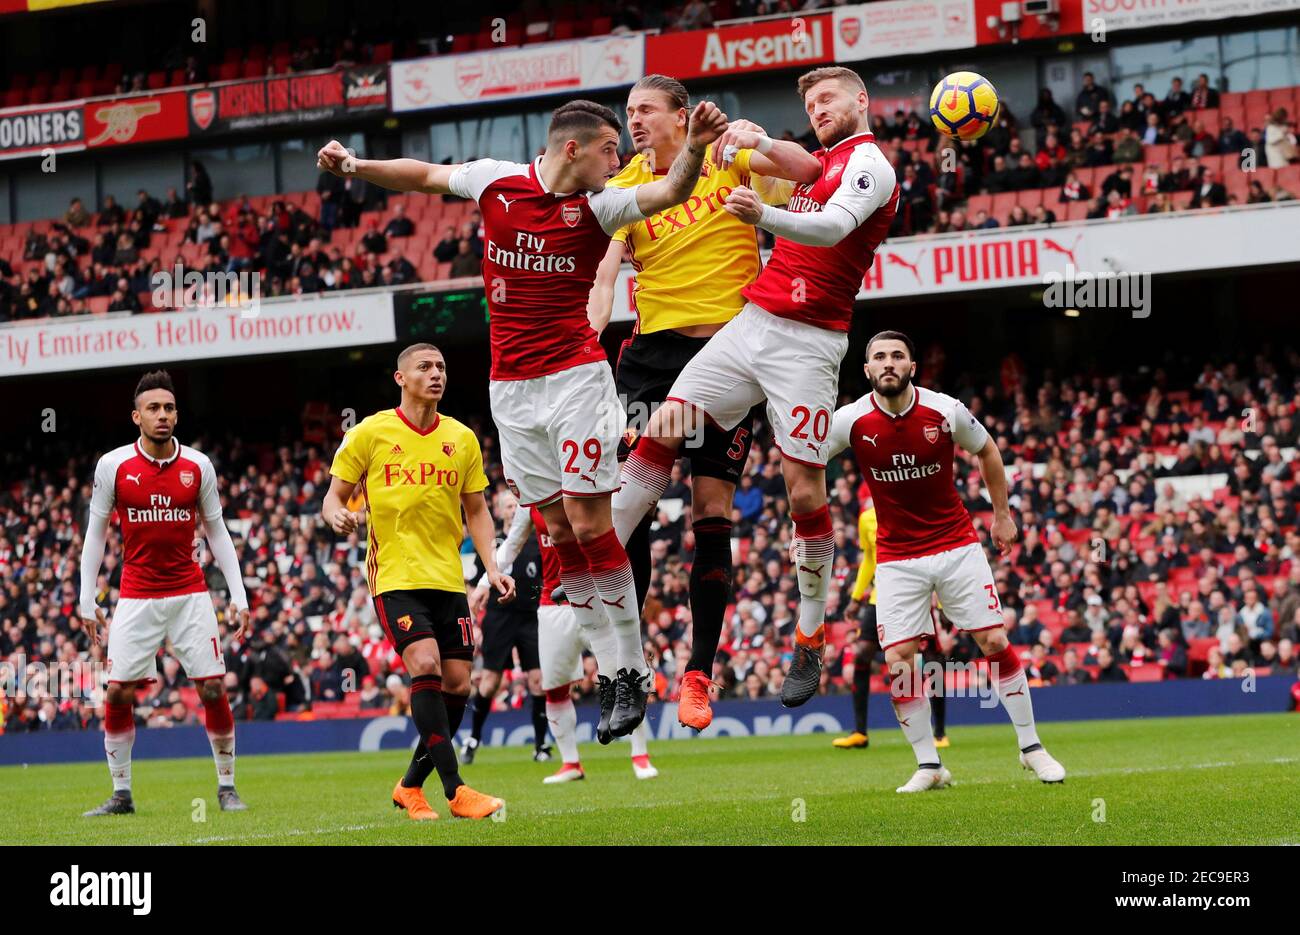 Soccer Football - Premier League - Arsenal vs Watford - Emirates Stadium, London, Britain - March 11, 2018   Arsenal's Granit Xhaka and Shkodran Mustafi in action with Watford's Sebastian Prodl    REUTERS/Eddie Keogh    EDITORIAL USE ONLY. No use with unauthorized audio, video, data, fixture lists, club/league logos or 'live' services. Online in-match use limited to 75 images, no video emulation. No use in betting, games or single club/league/player publications.  Please contact your account representative for further details. Stock Photo